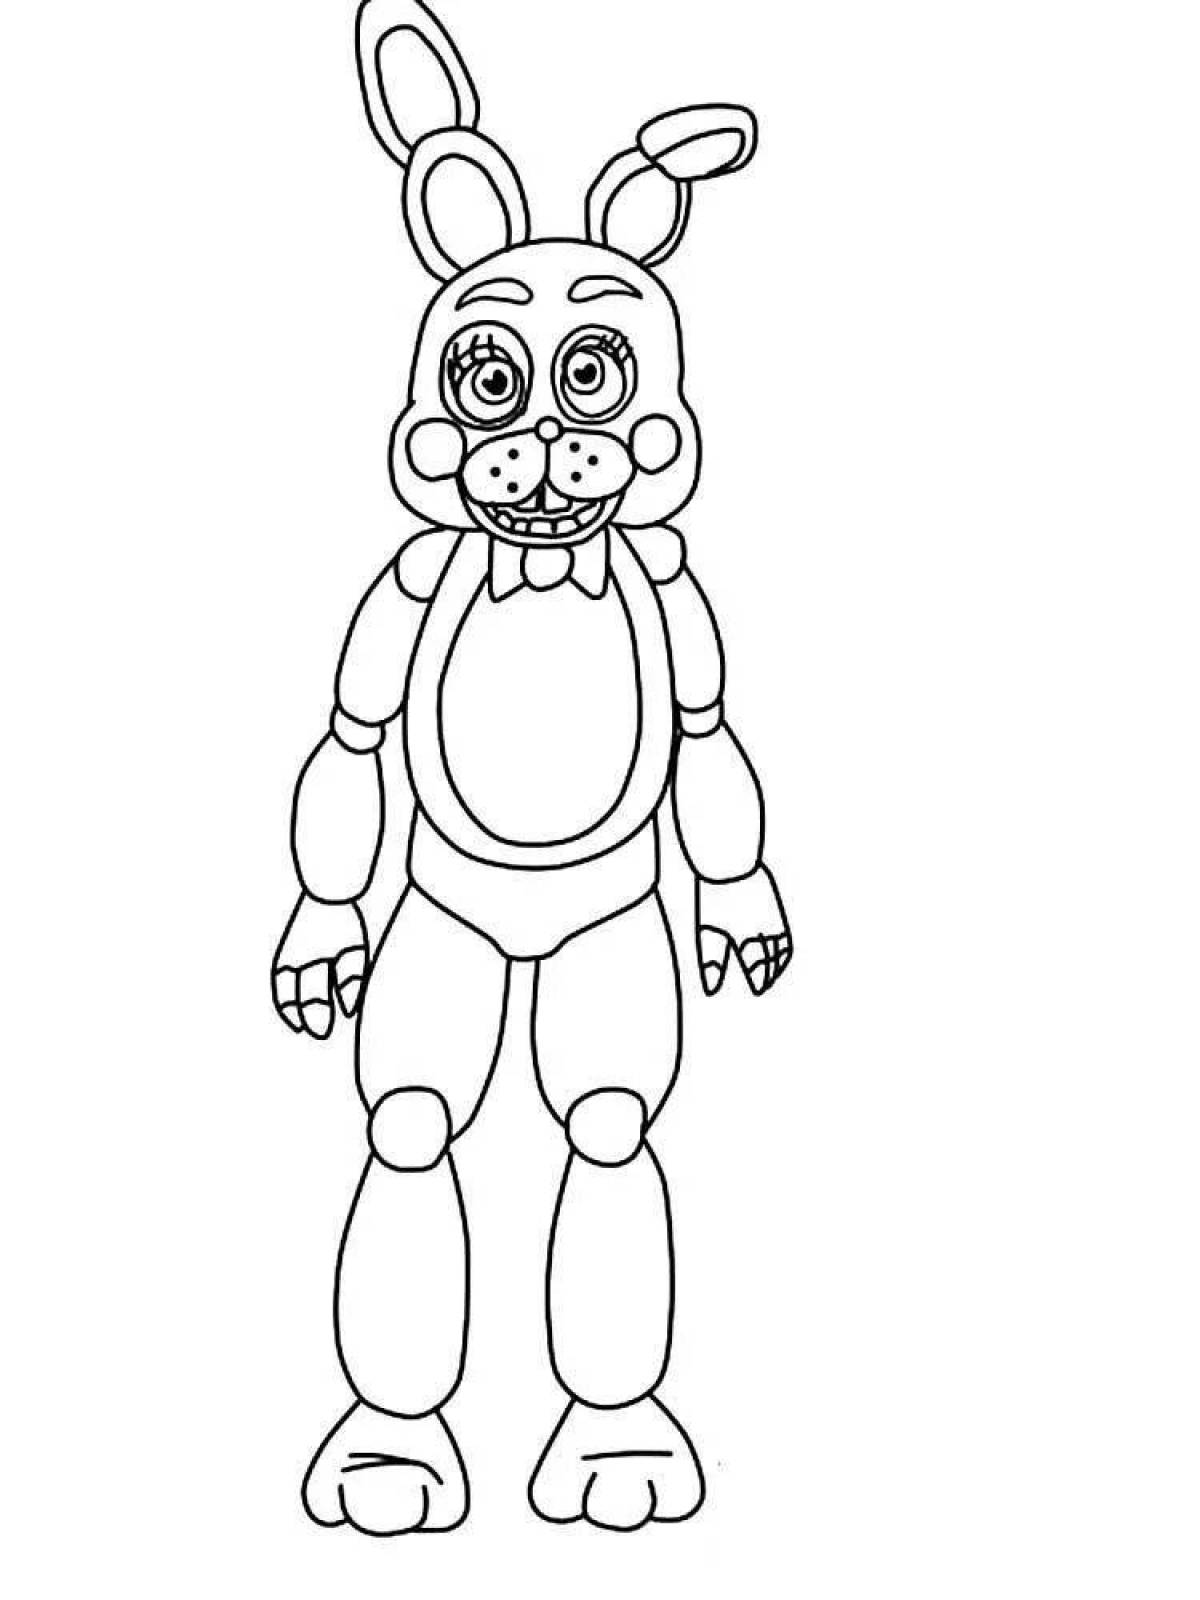 Matronic coloring page